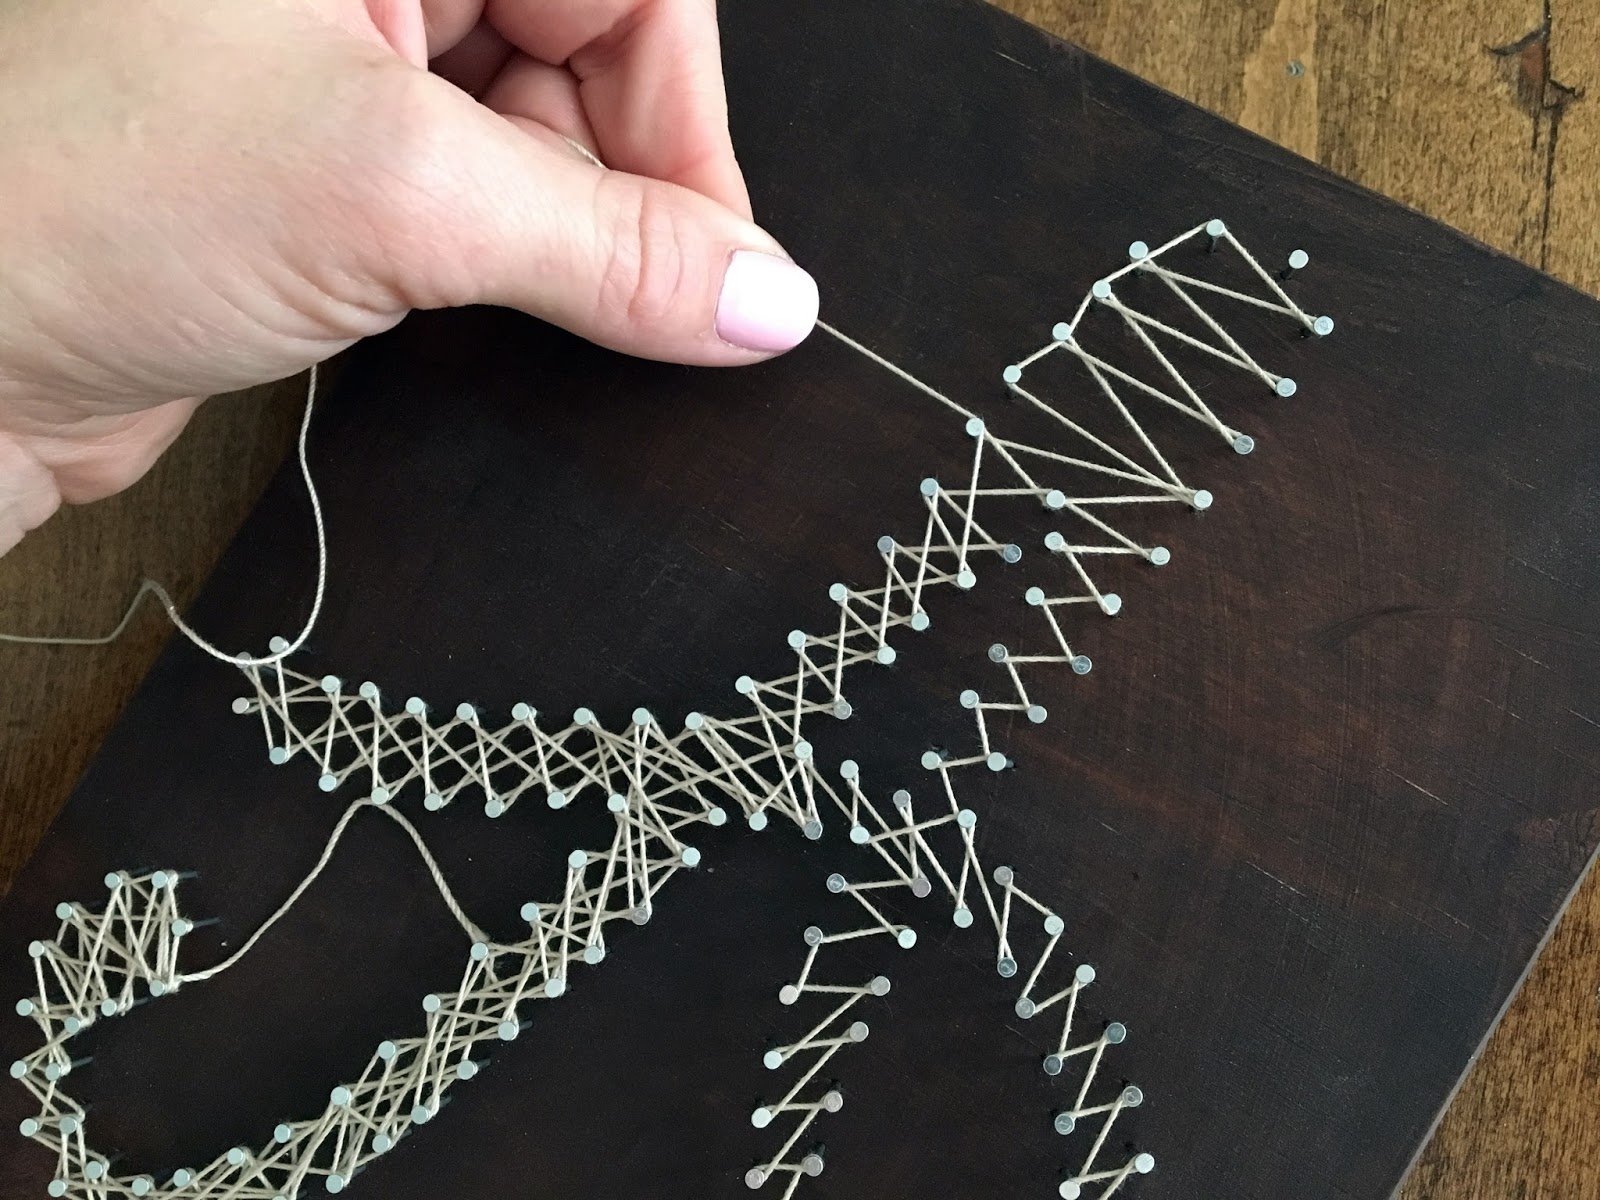 7. "Nail String Art: A Complete Guide to Creating Beautiful Designs" by Rachel Johnson - wide 3